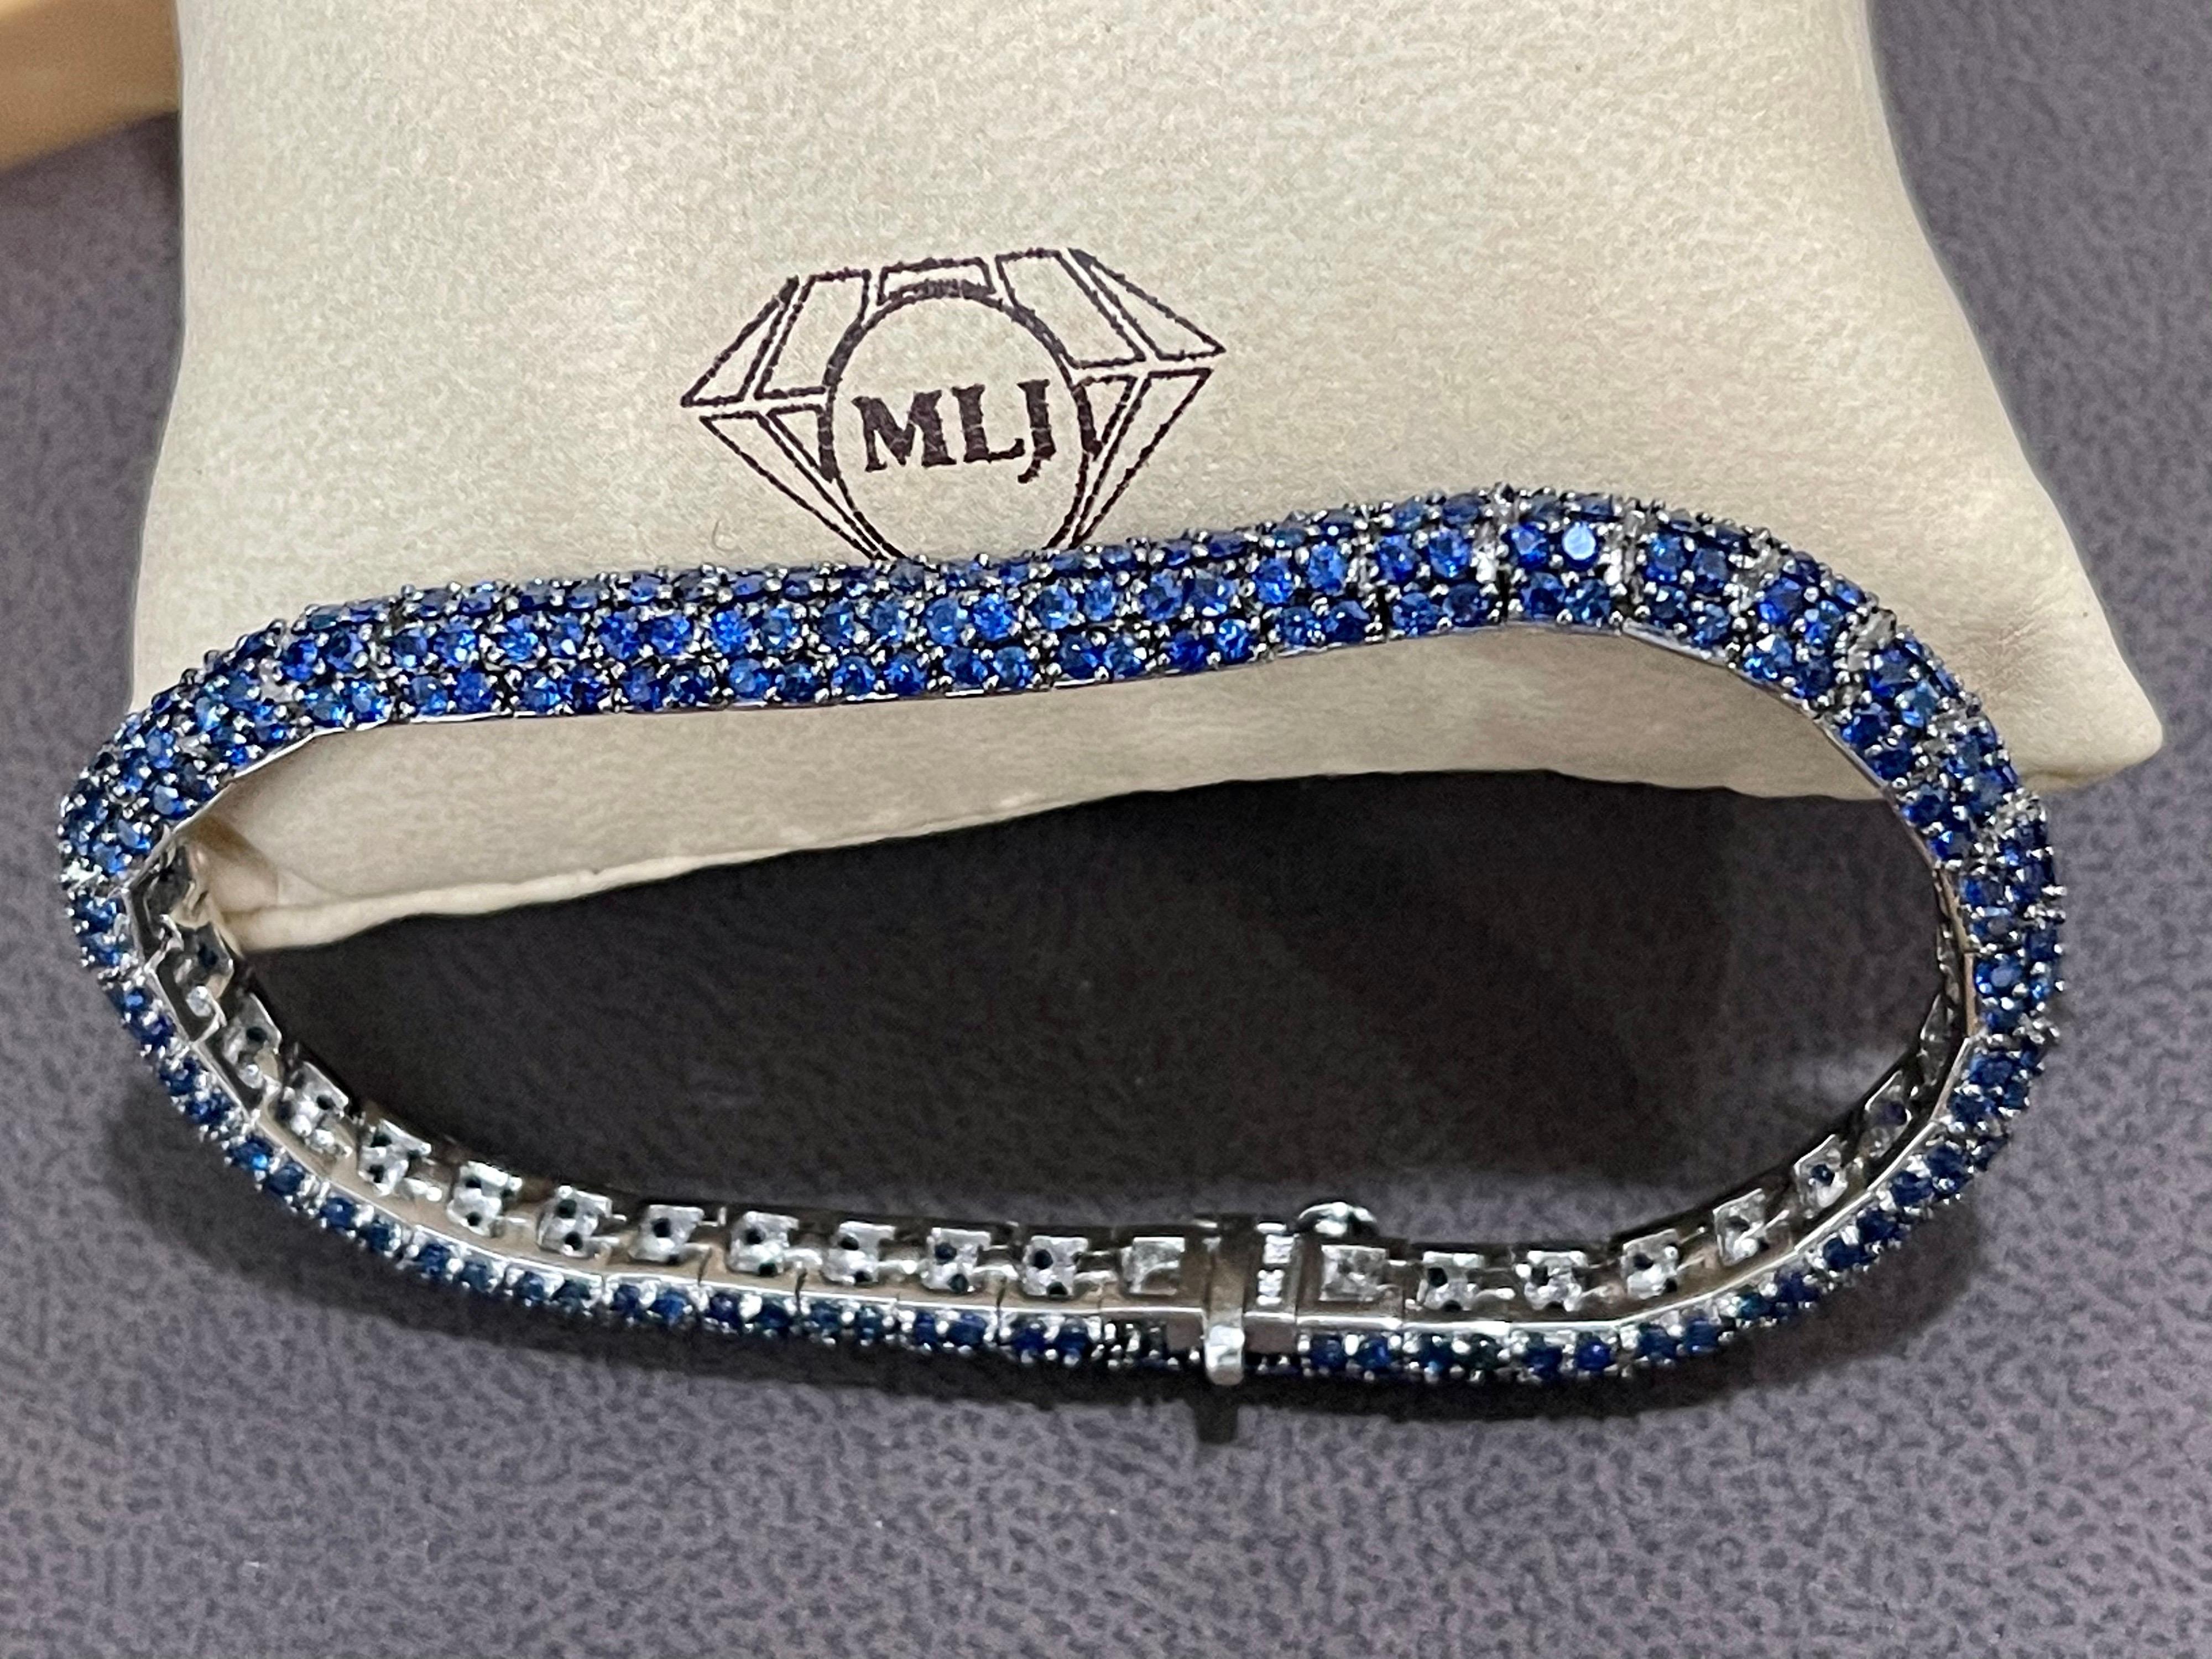  This exceptionally affordable Tennis  bracelet has  Multiple stones of  Blue Sapphires.
 Total weight of Sapphire is  13.5 carat. 
The bracelet is expertly crafted with 21.8 grams of  14 karat gold . Have a safety clasp.
Standard 7 inch long.

Any